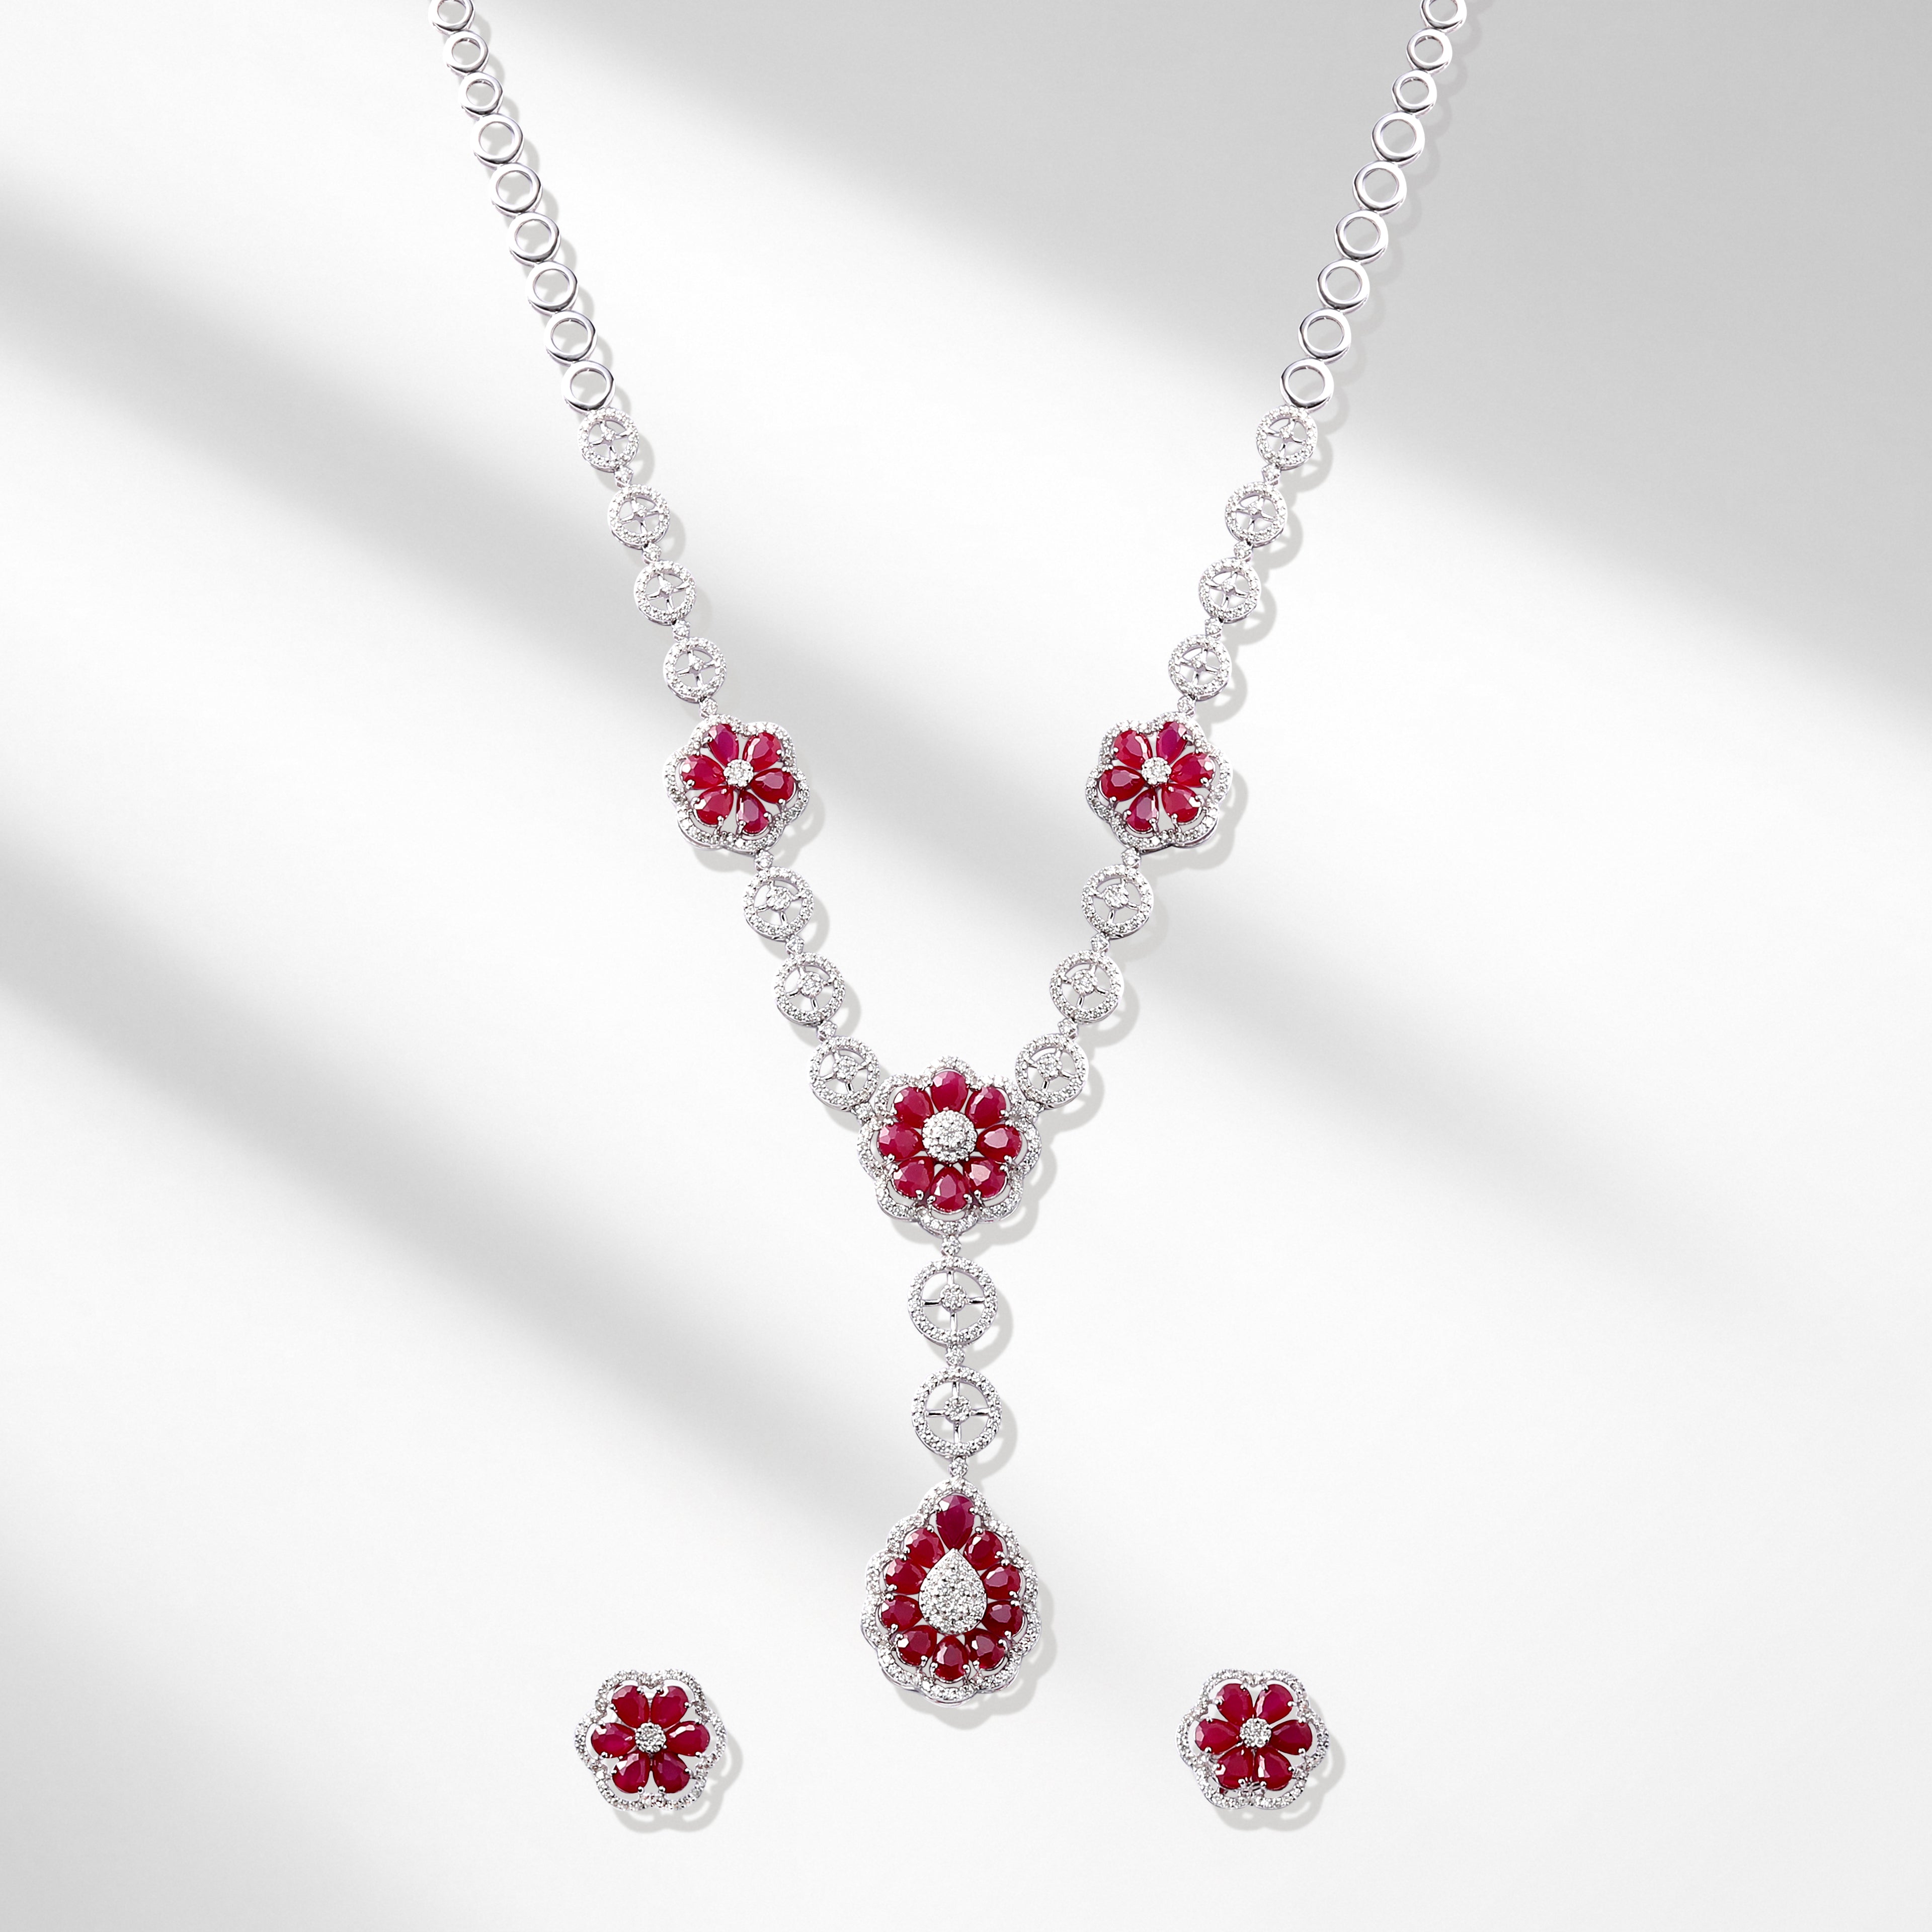 Certified 14K Gold 23.5ct Natural Diamond w/ Simulated Ruby Wedding Flower White Necklace Set